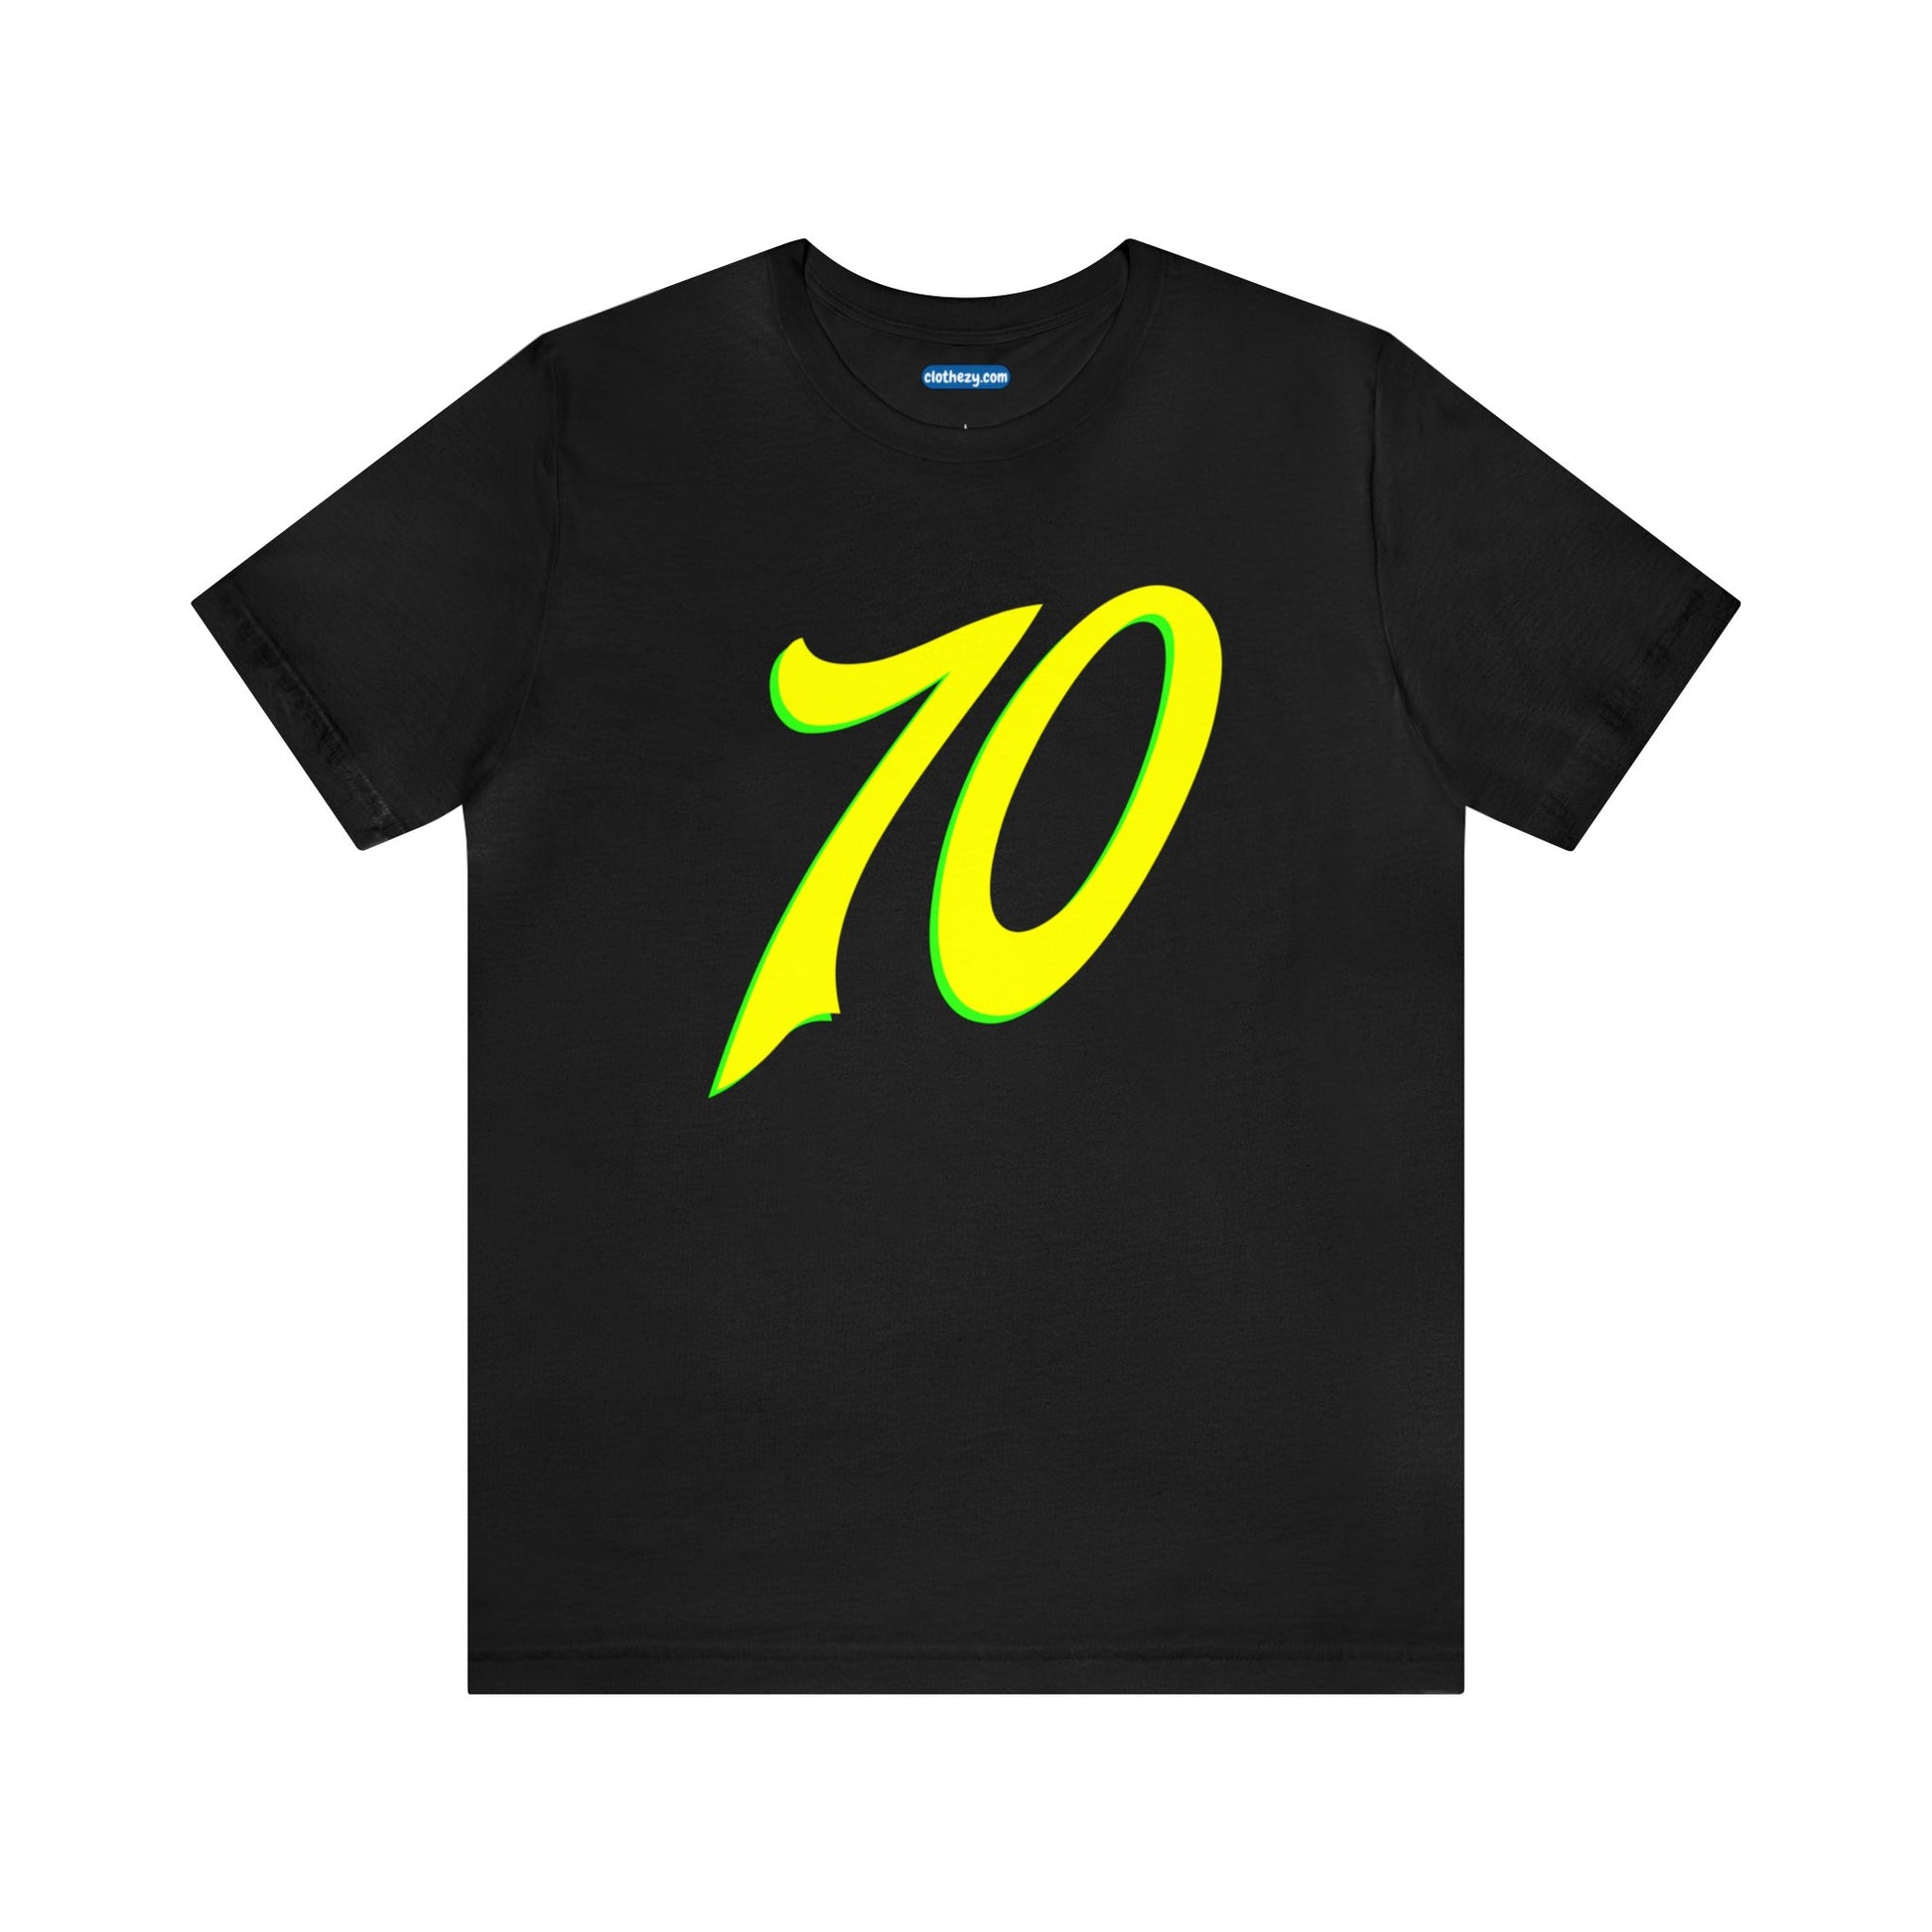 Number 70 Design - Soft Cotton Tee for birthdays and celebrations, Gift for friends and family, Multiple Options by clothezy.com in Dark Grey Heather Size Small - Buy Now